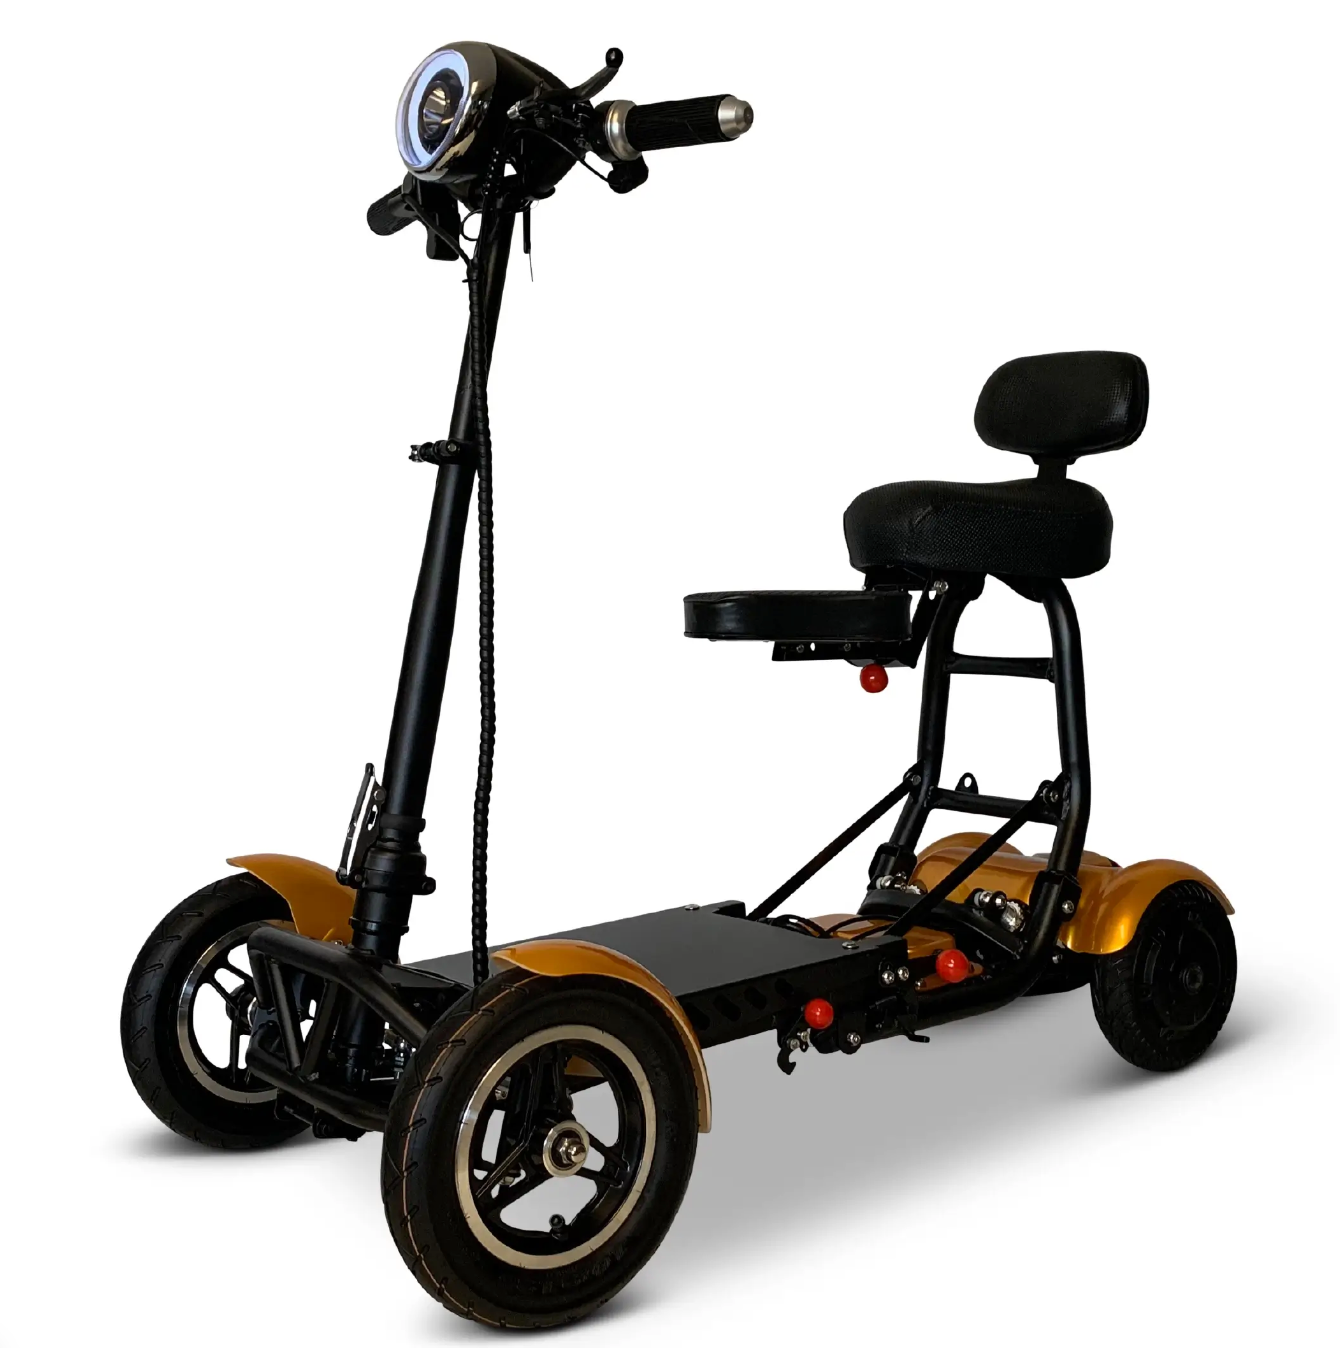 ComfyGo MS-3000 Foldable Mobility Scooters